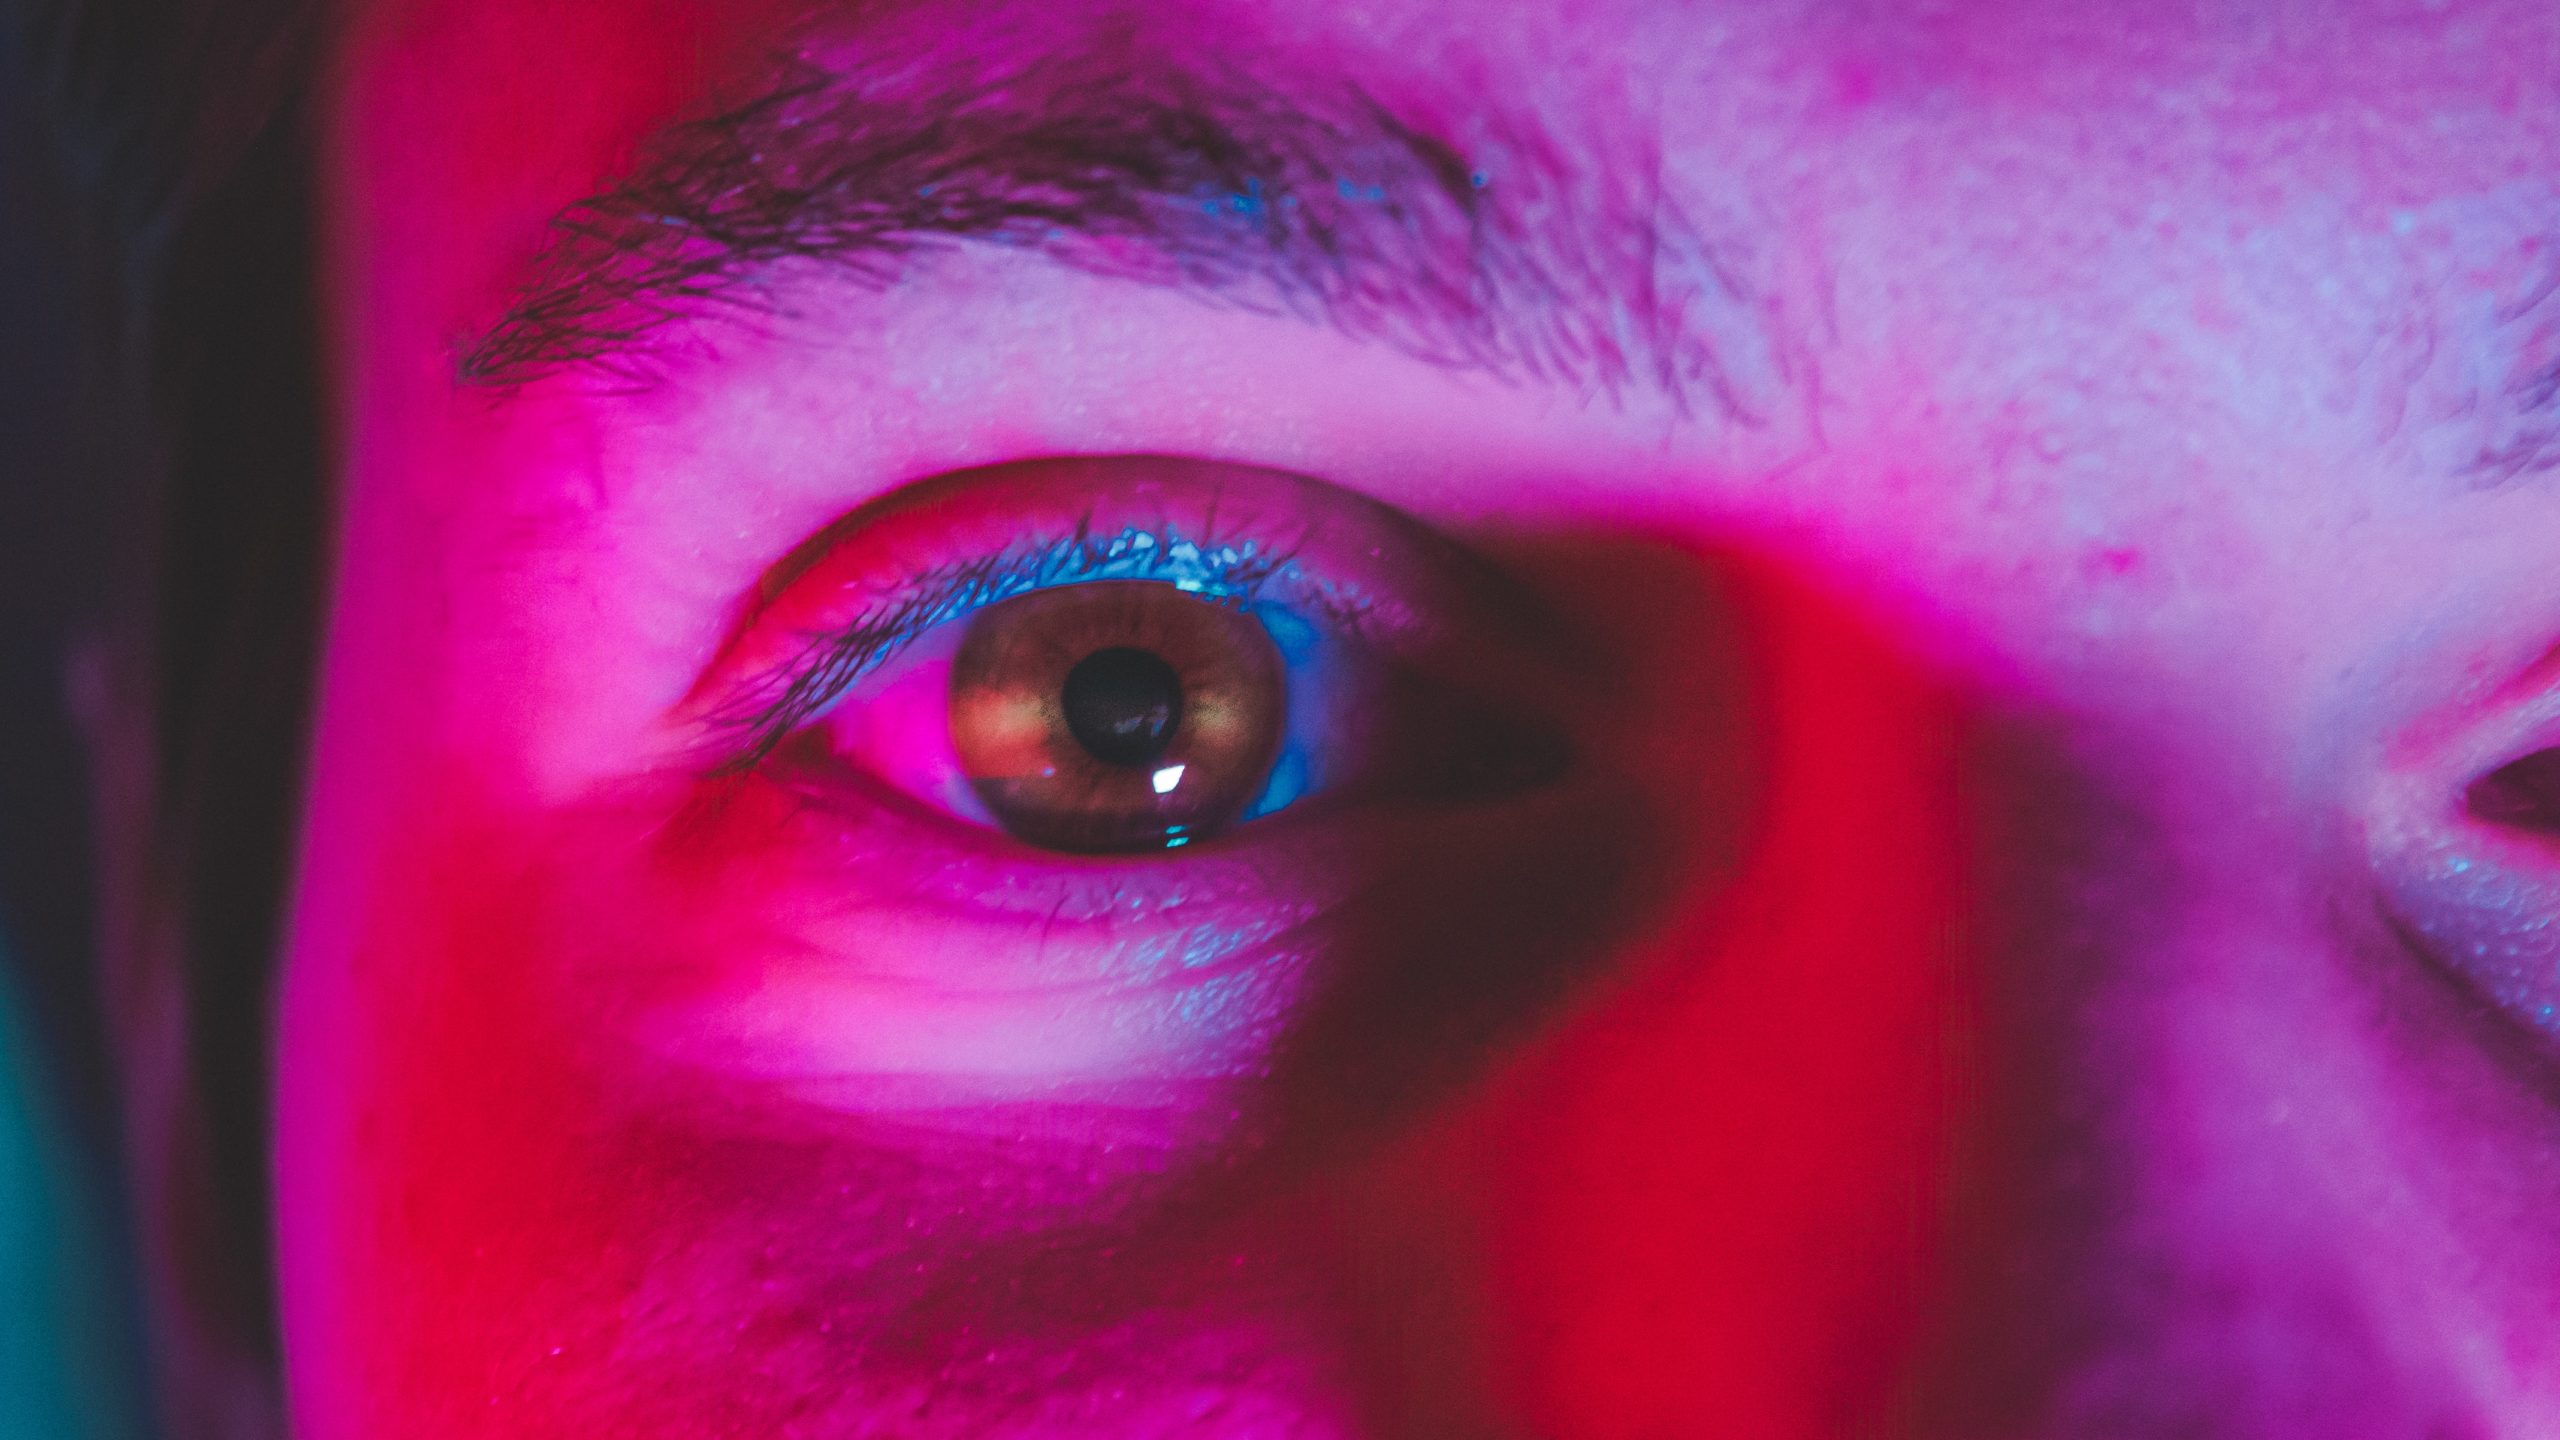 A closeup of someone's eye, lit in pink.